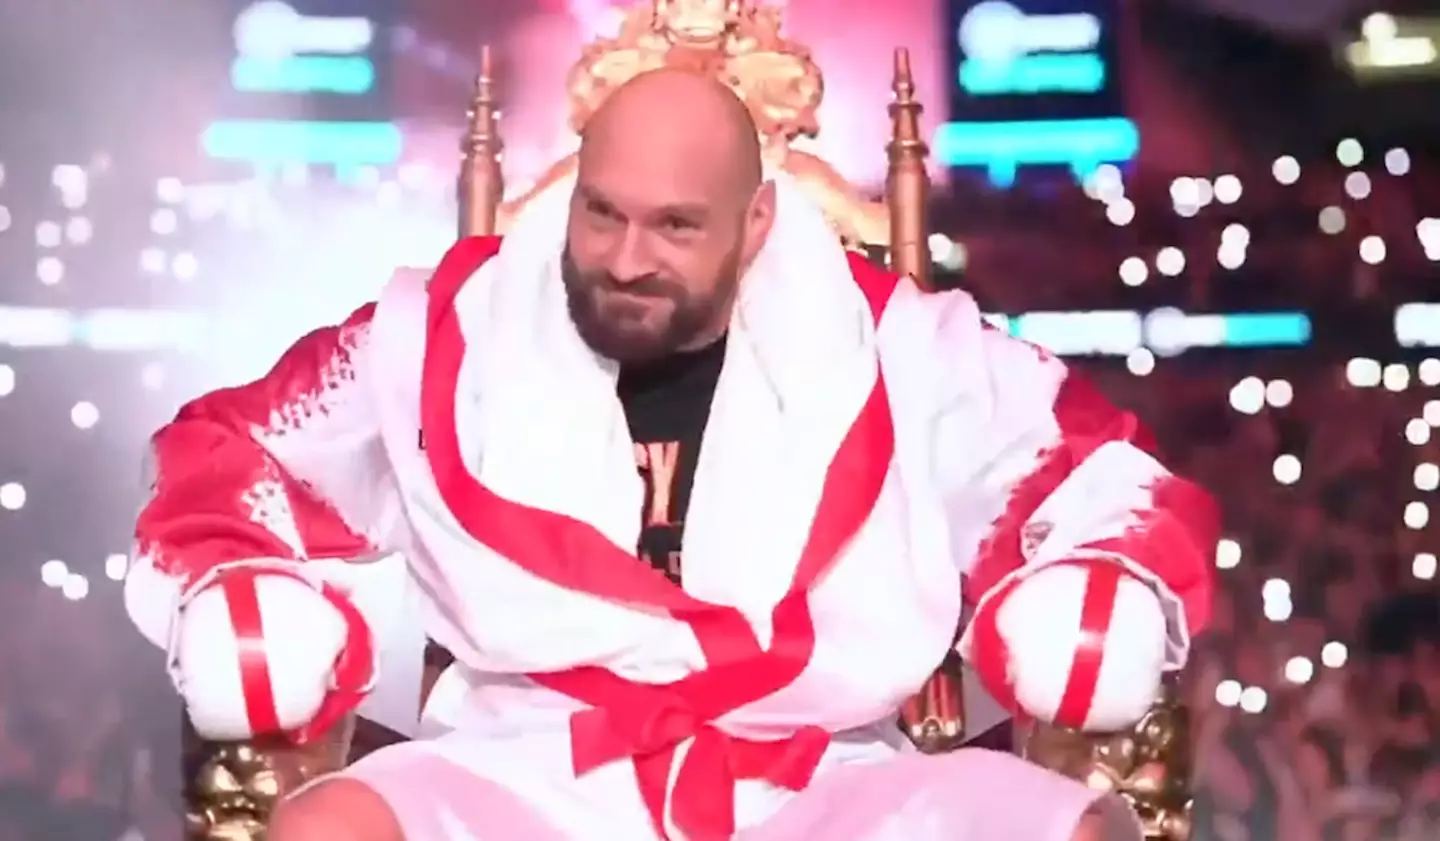 Tyson Fury wowed the crowds with his ring walk.